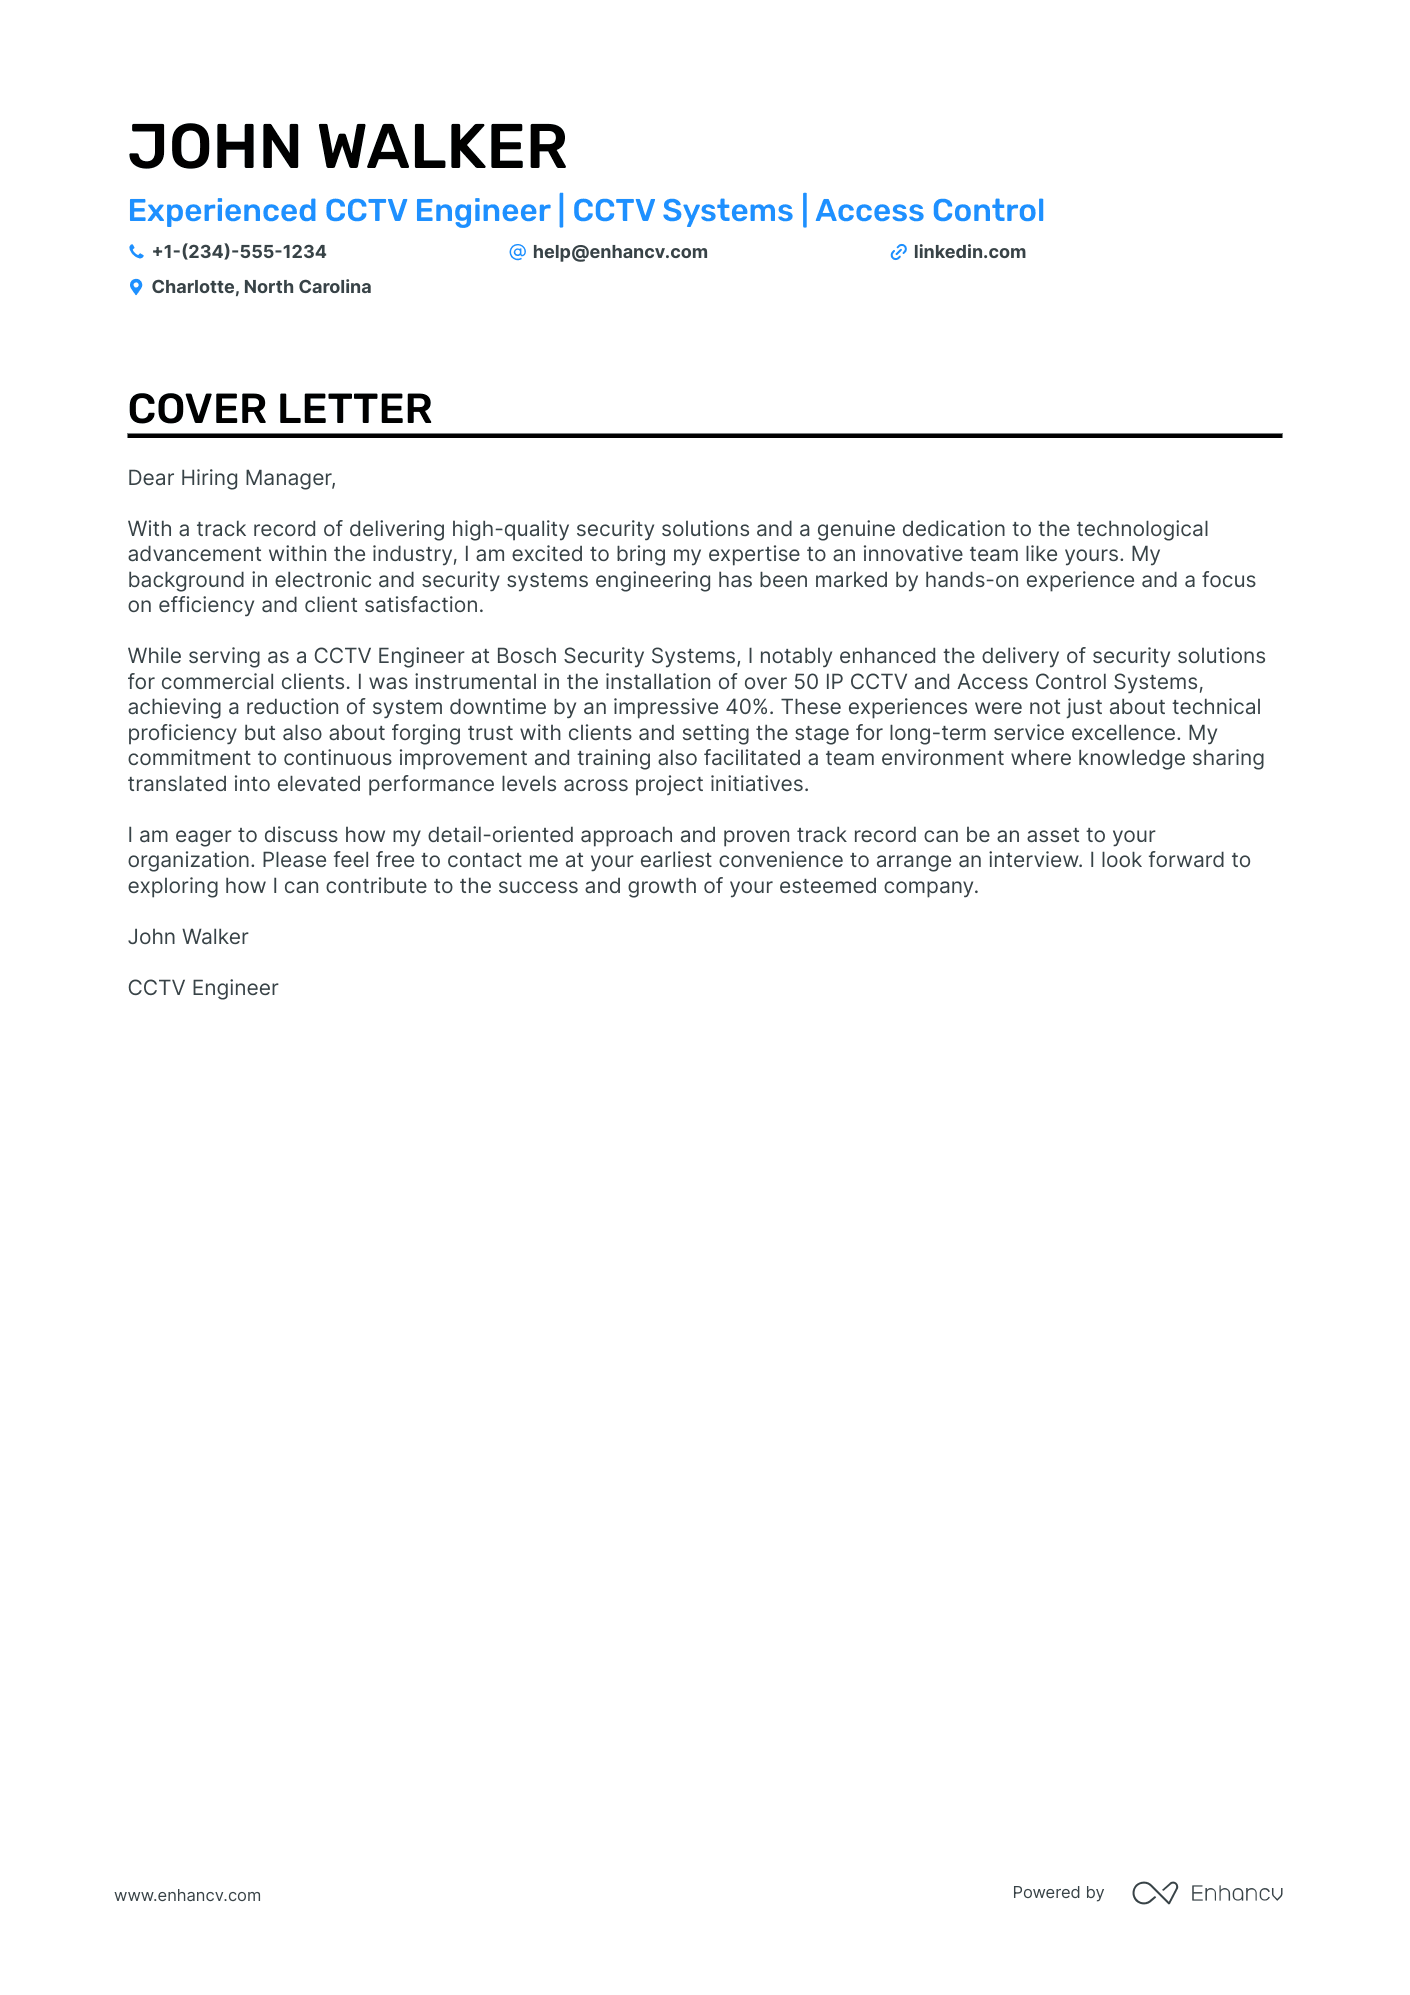 cover letter for systems engineer